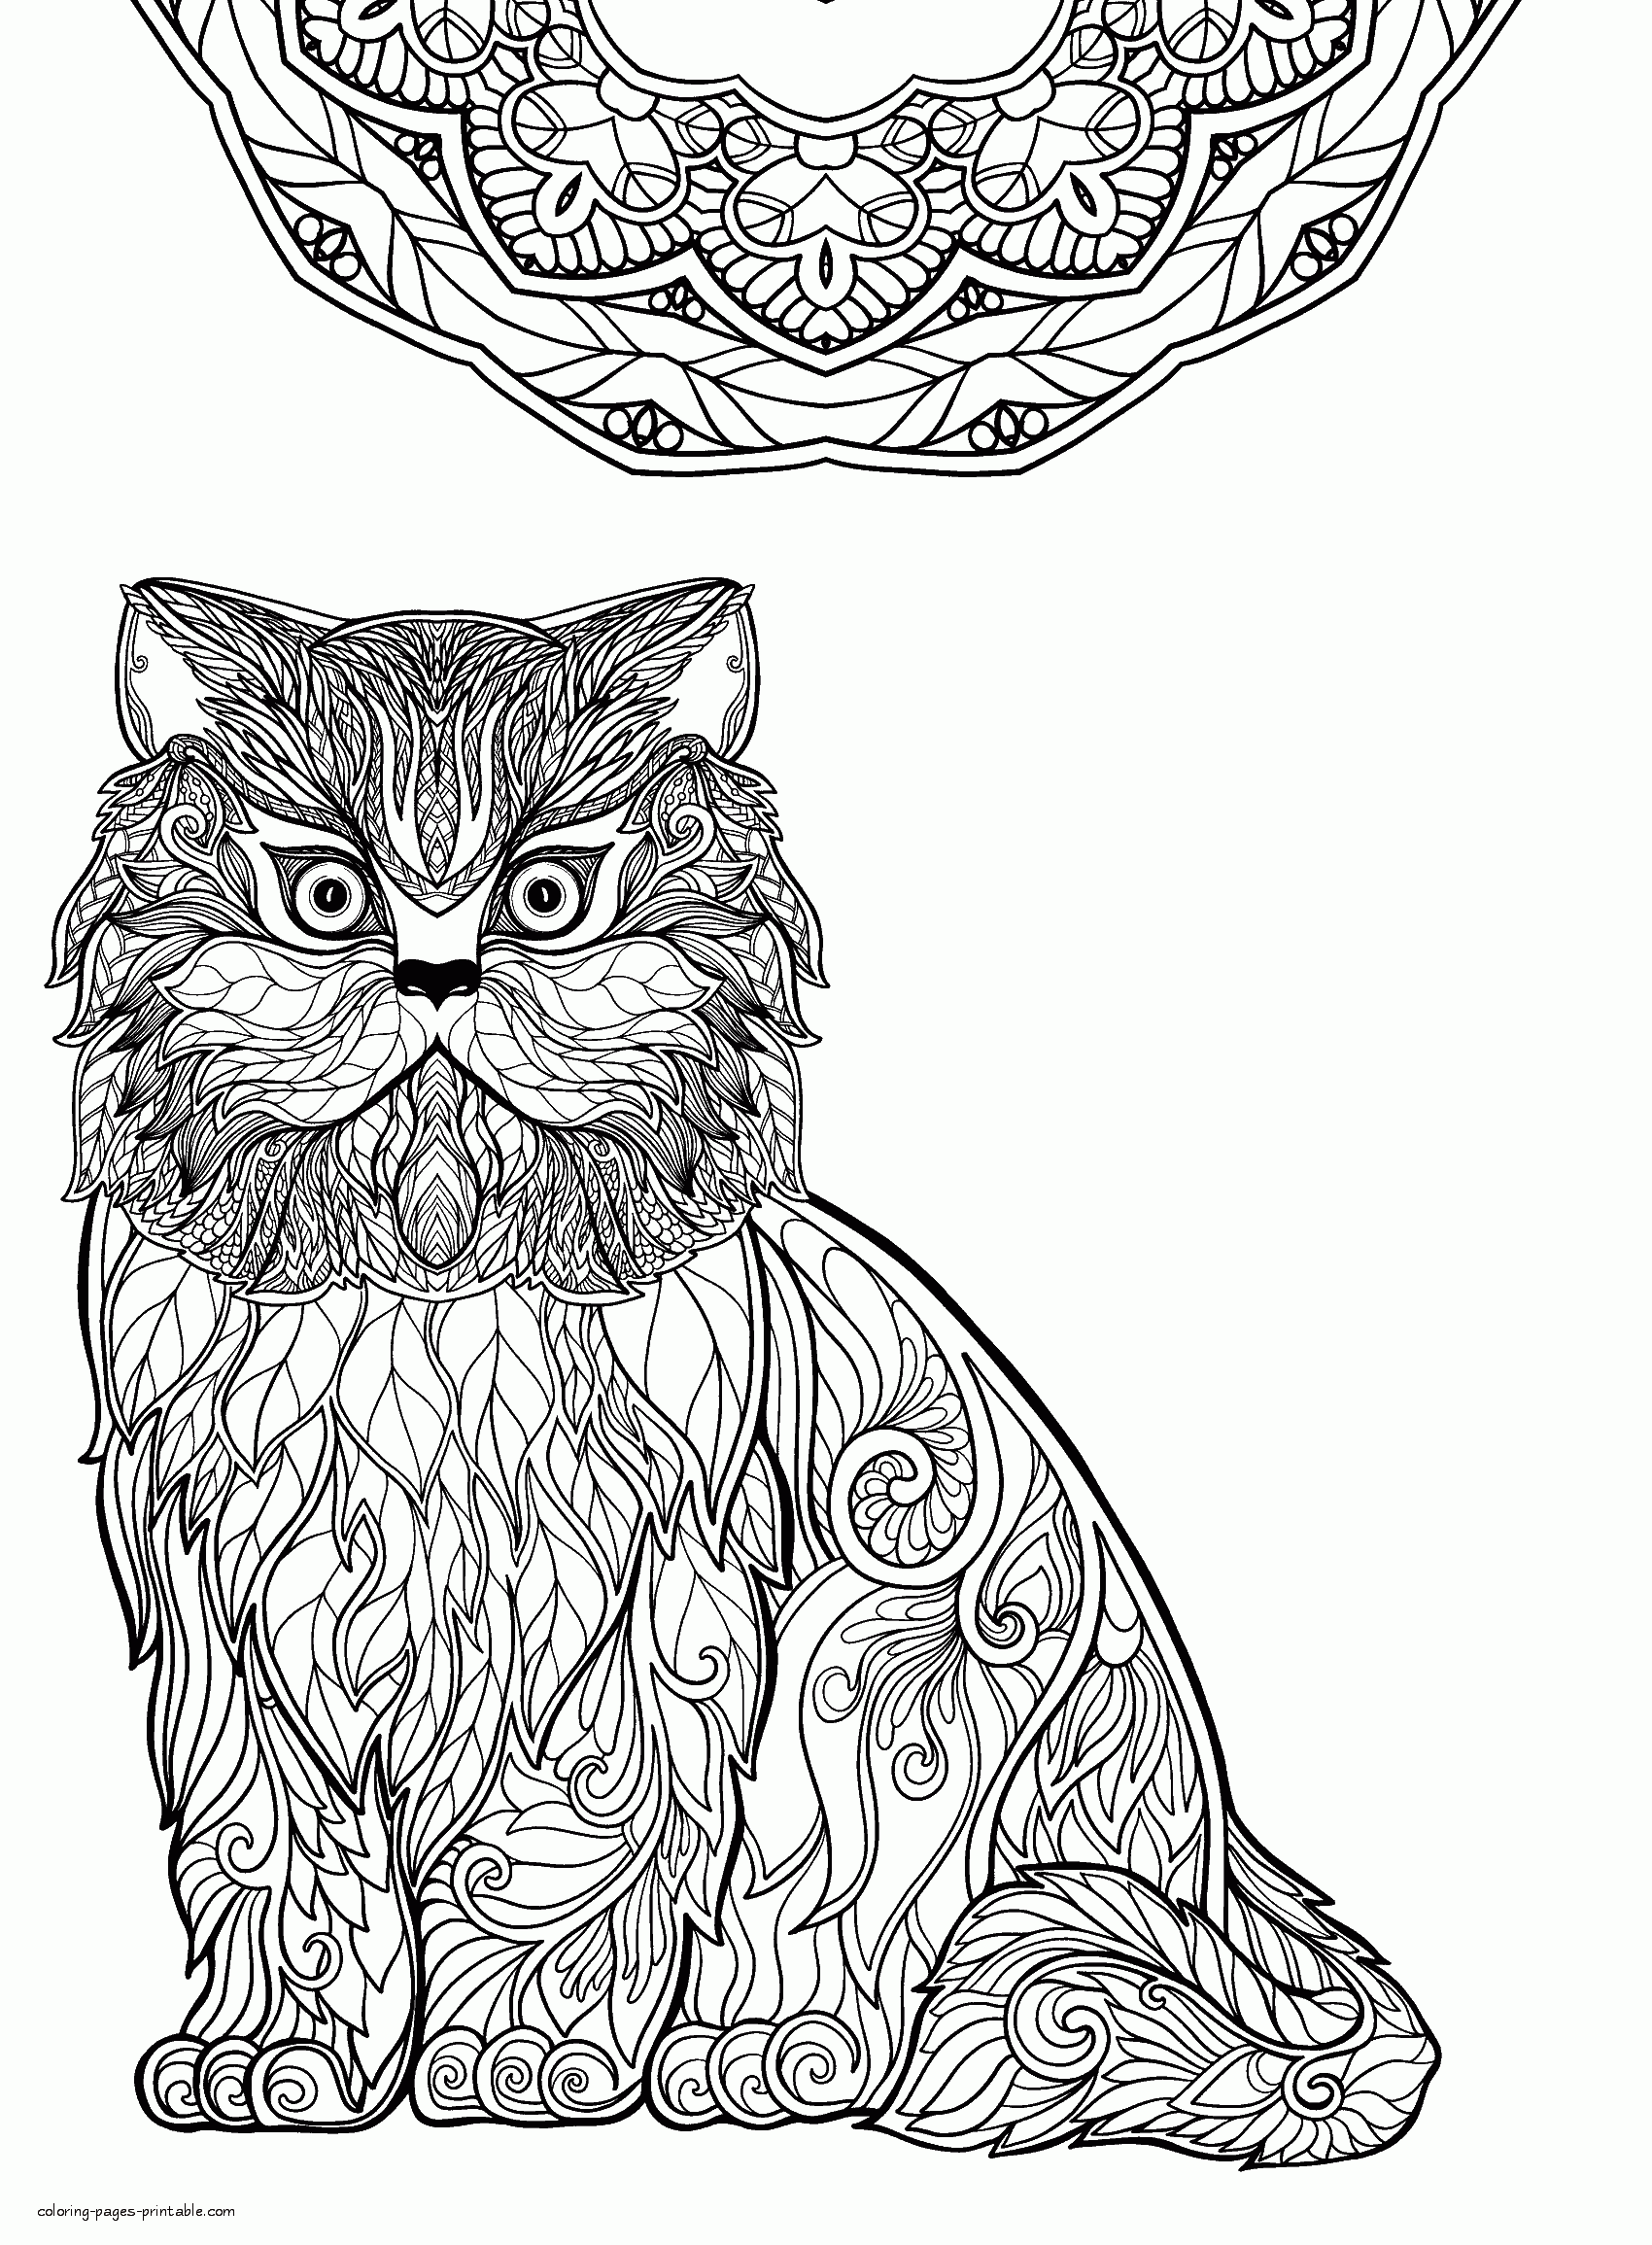 Adult Coloring Page Cat